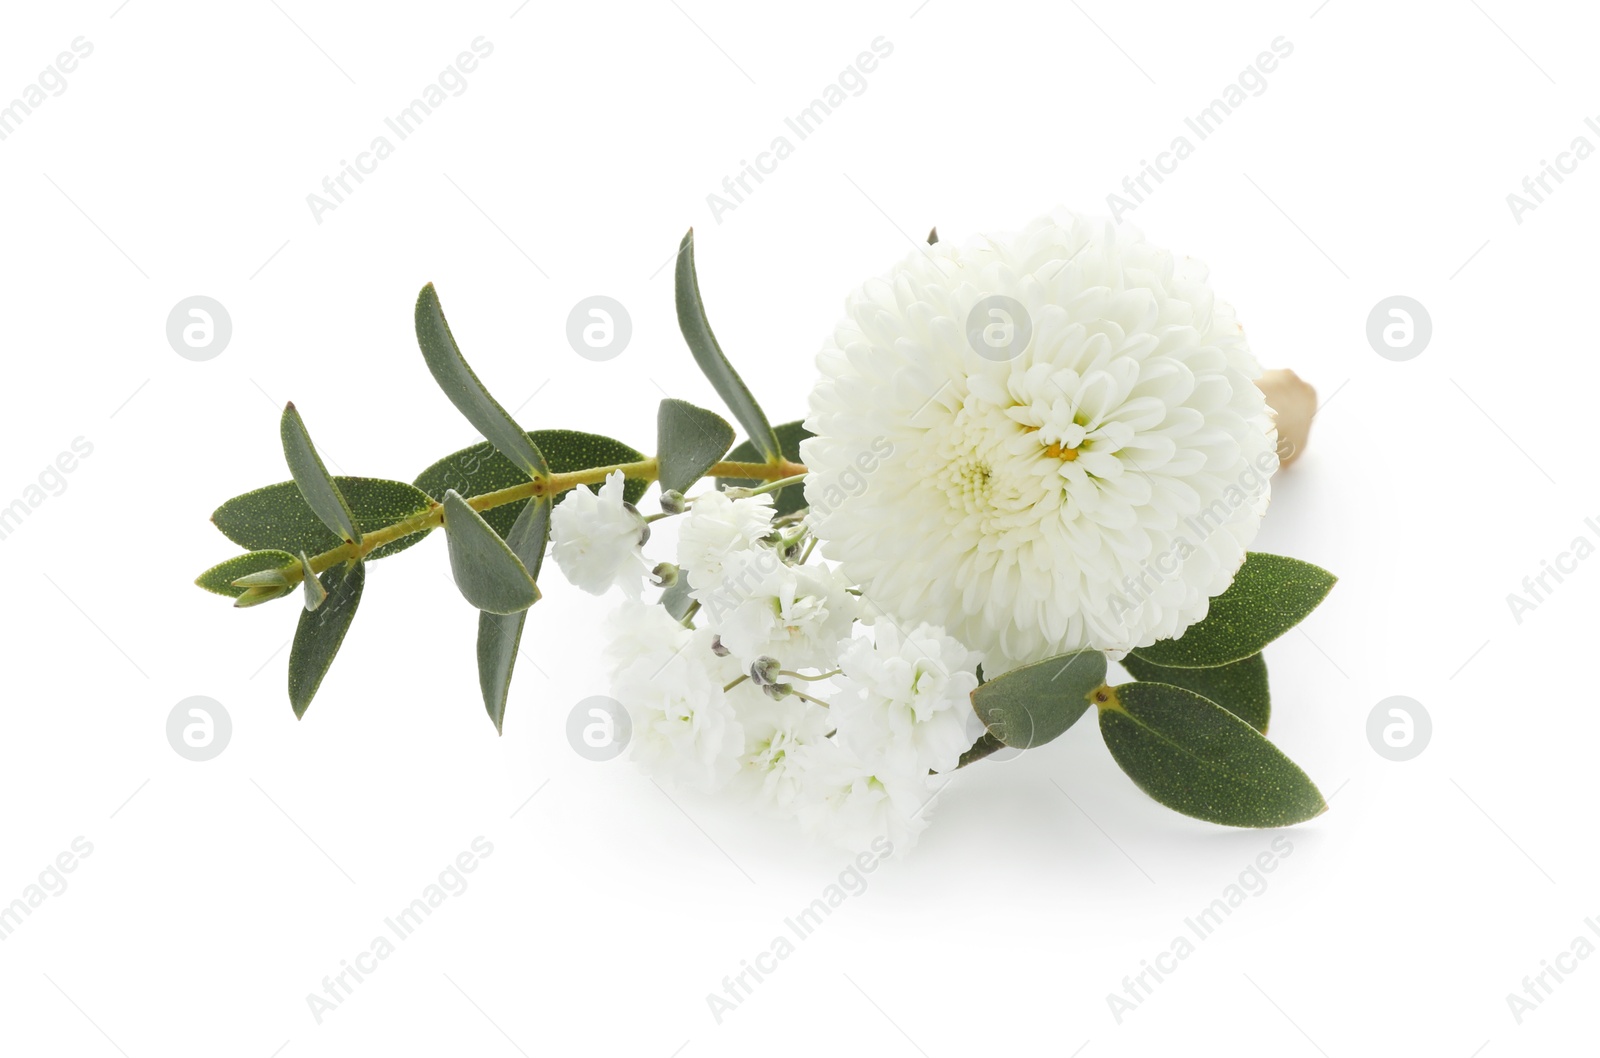 Photo of One small stylish boutonniere isolated on white